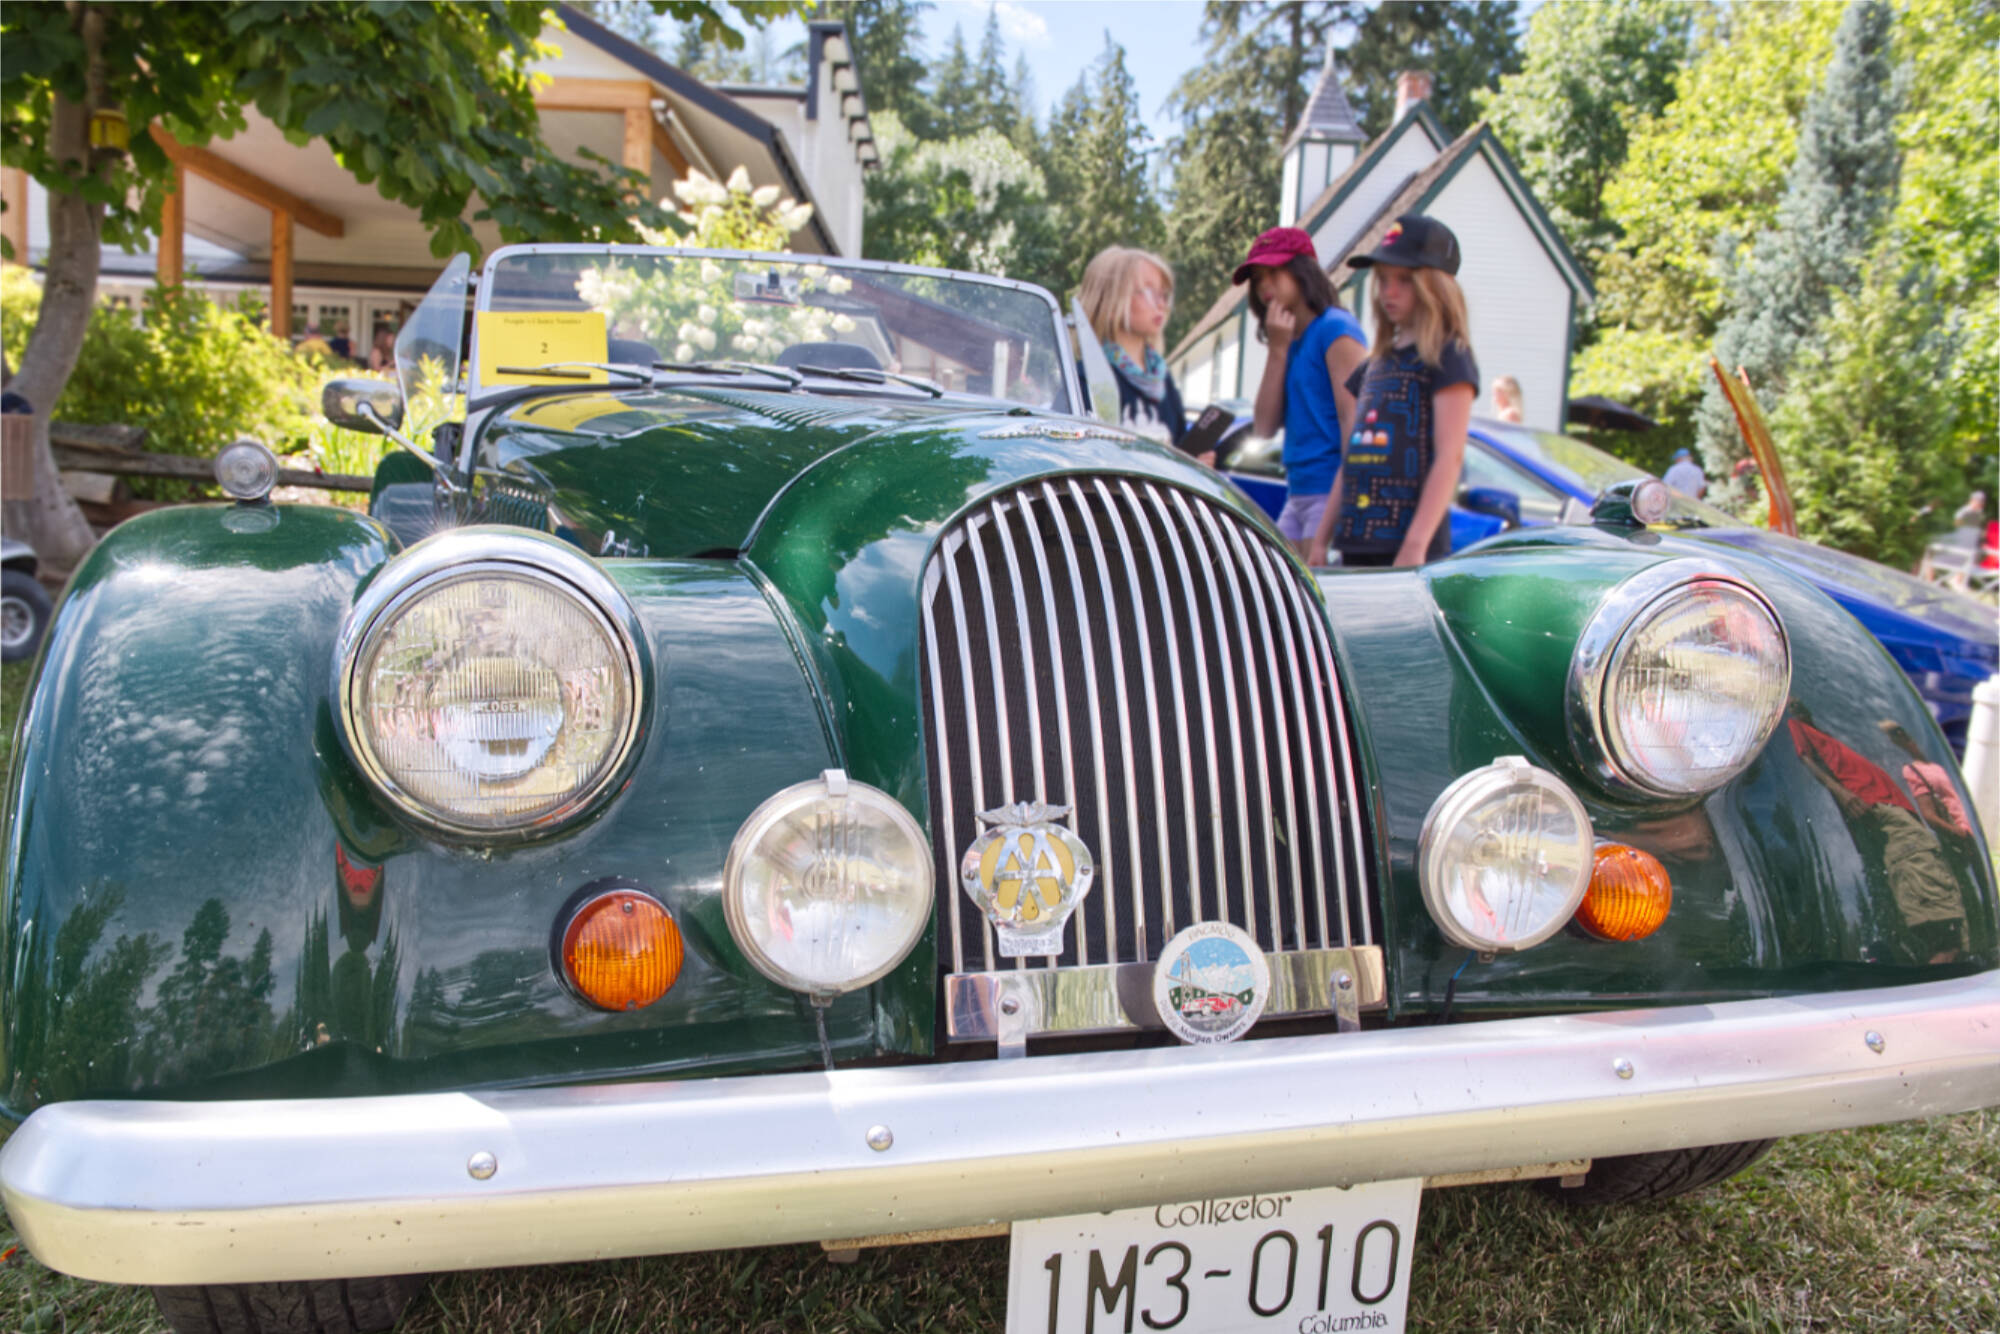 This iconic vintage British sports car, a Morgan, was a people’s choice contender at the 21st Annual Car Show at R.J. Haney Heritage Village and Museum on Sunday, Aug. 14, 2022. (Lachlan Labere-Salmon Arm Observer)